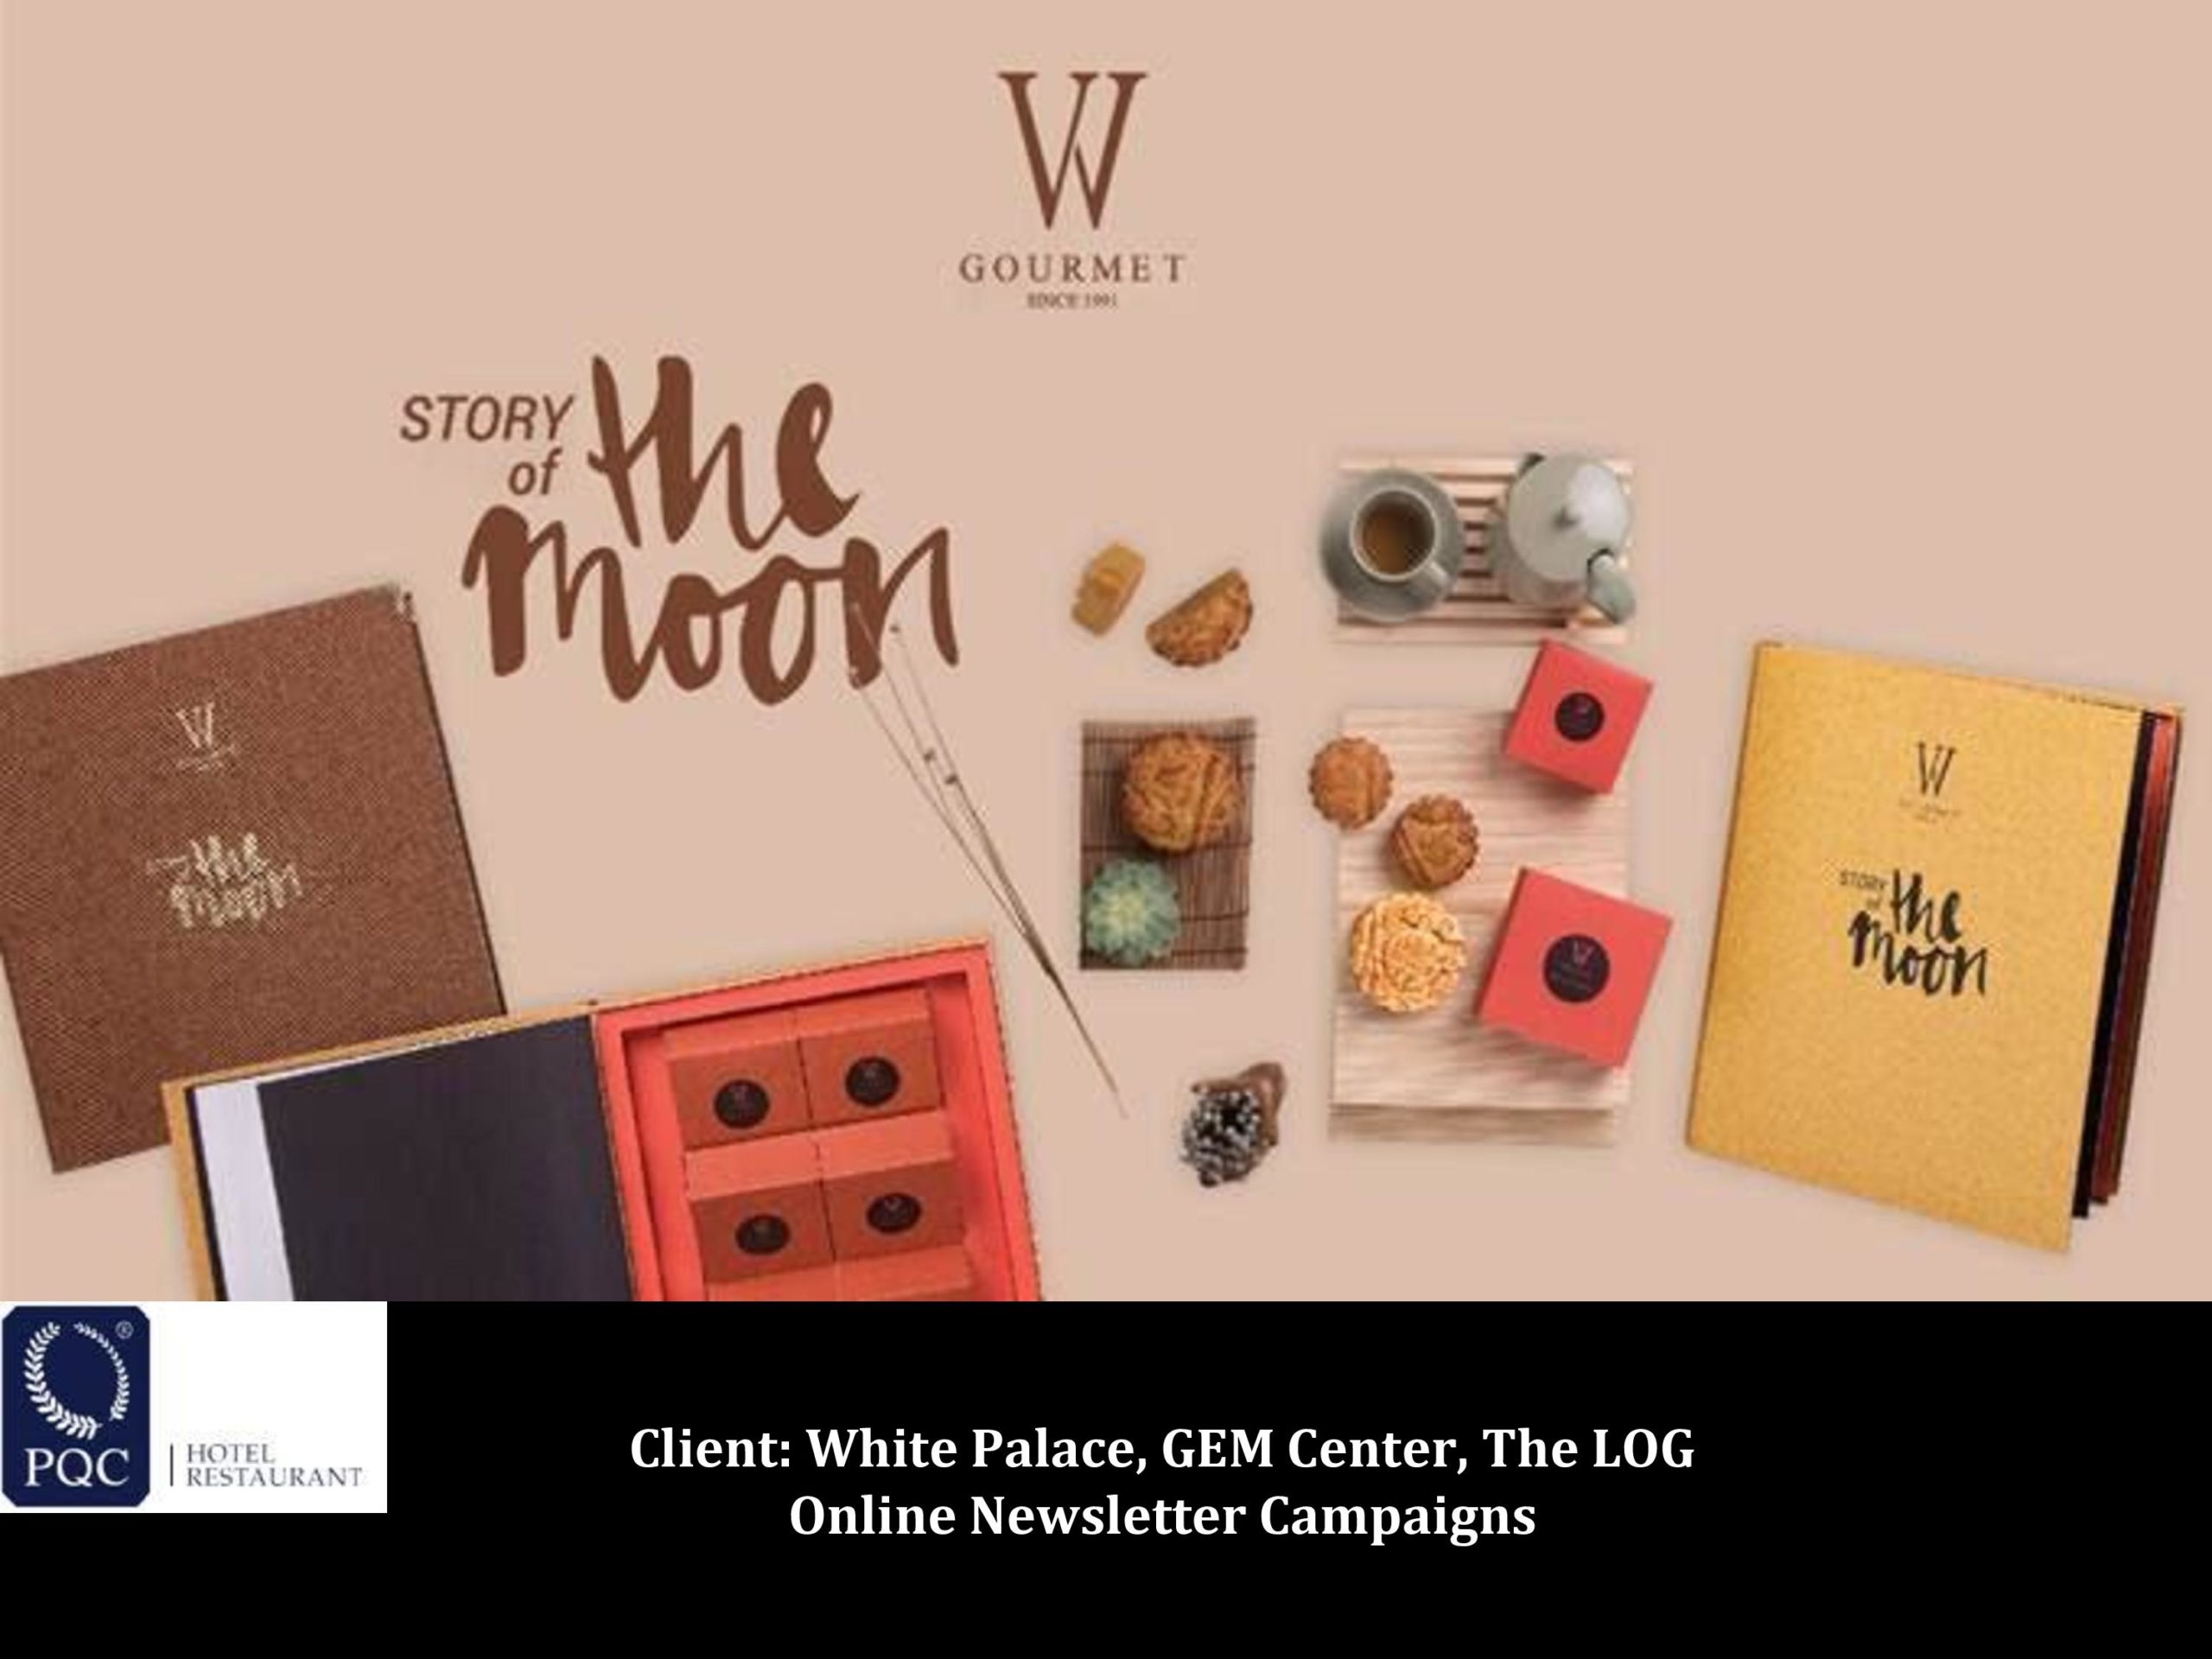 Newsletter campaign designs for email marketing